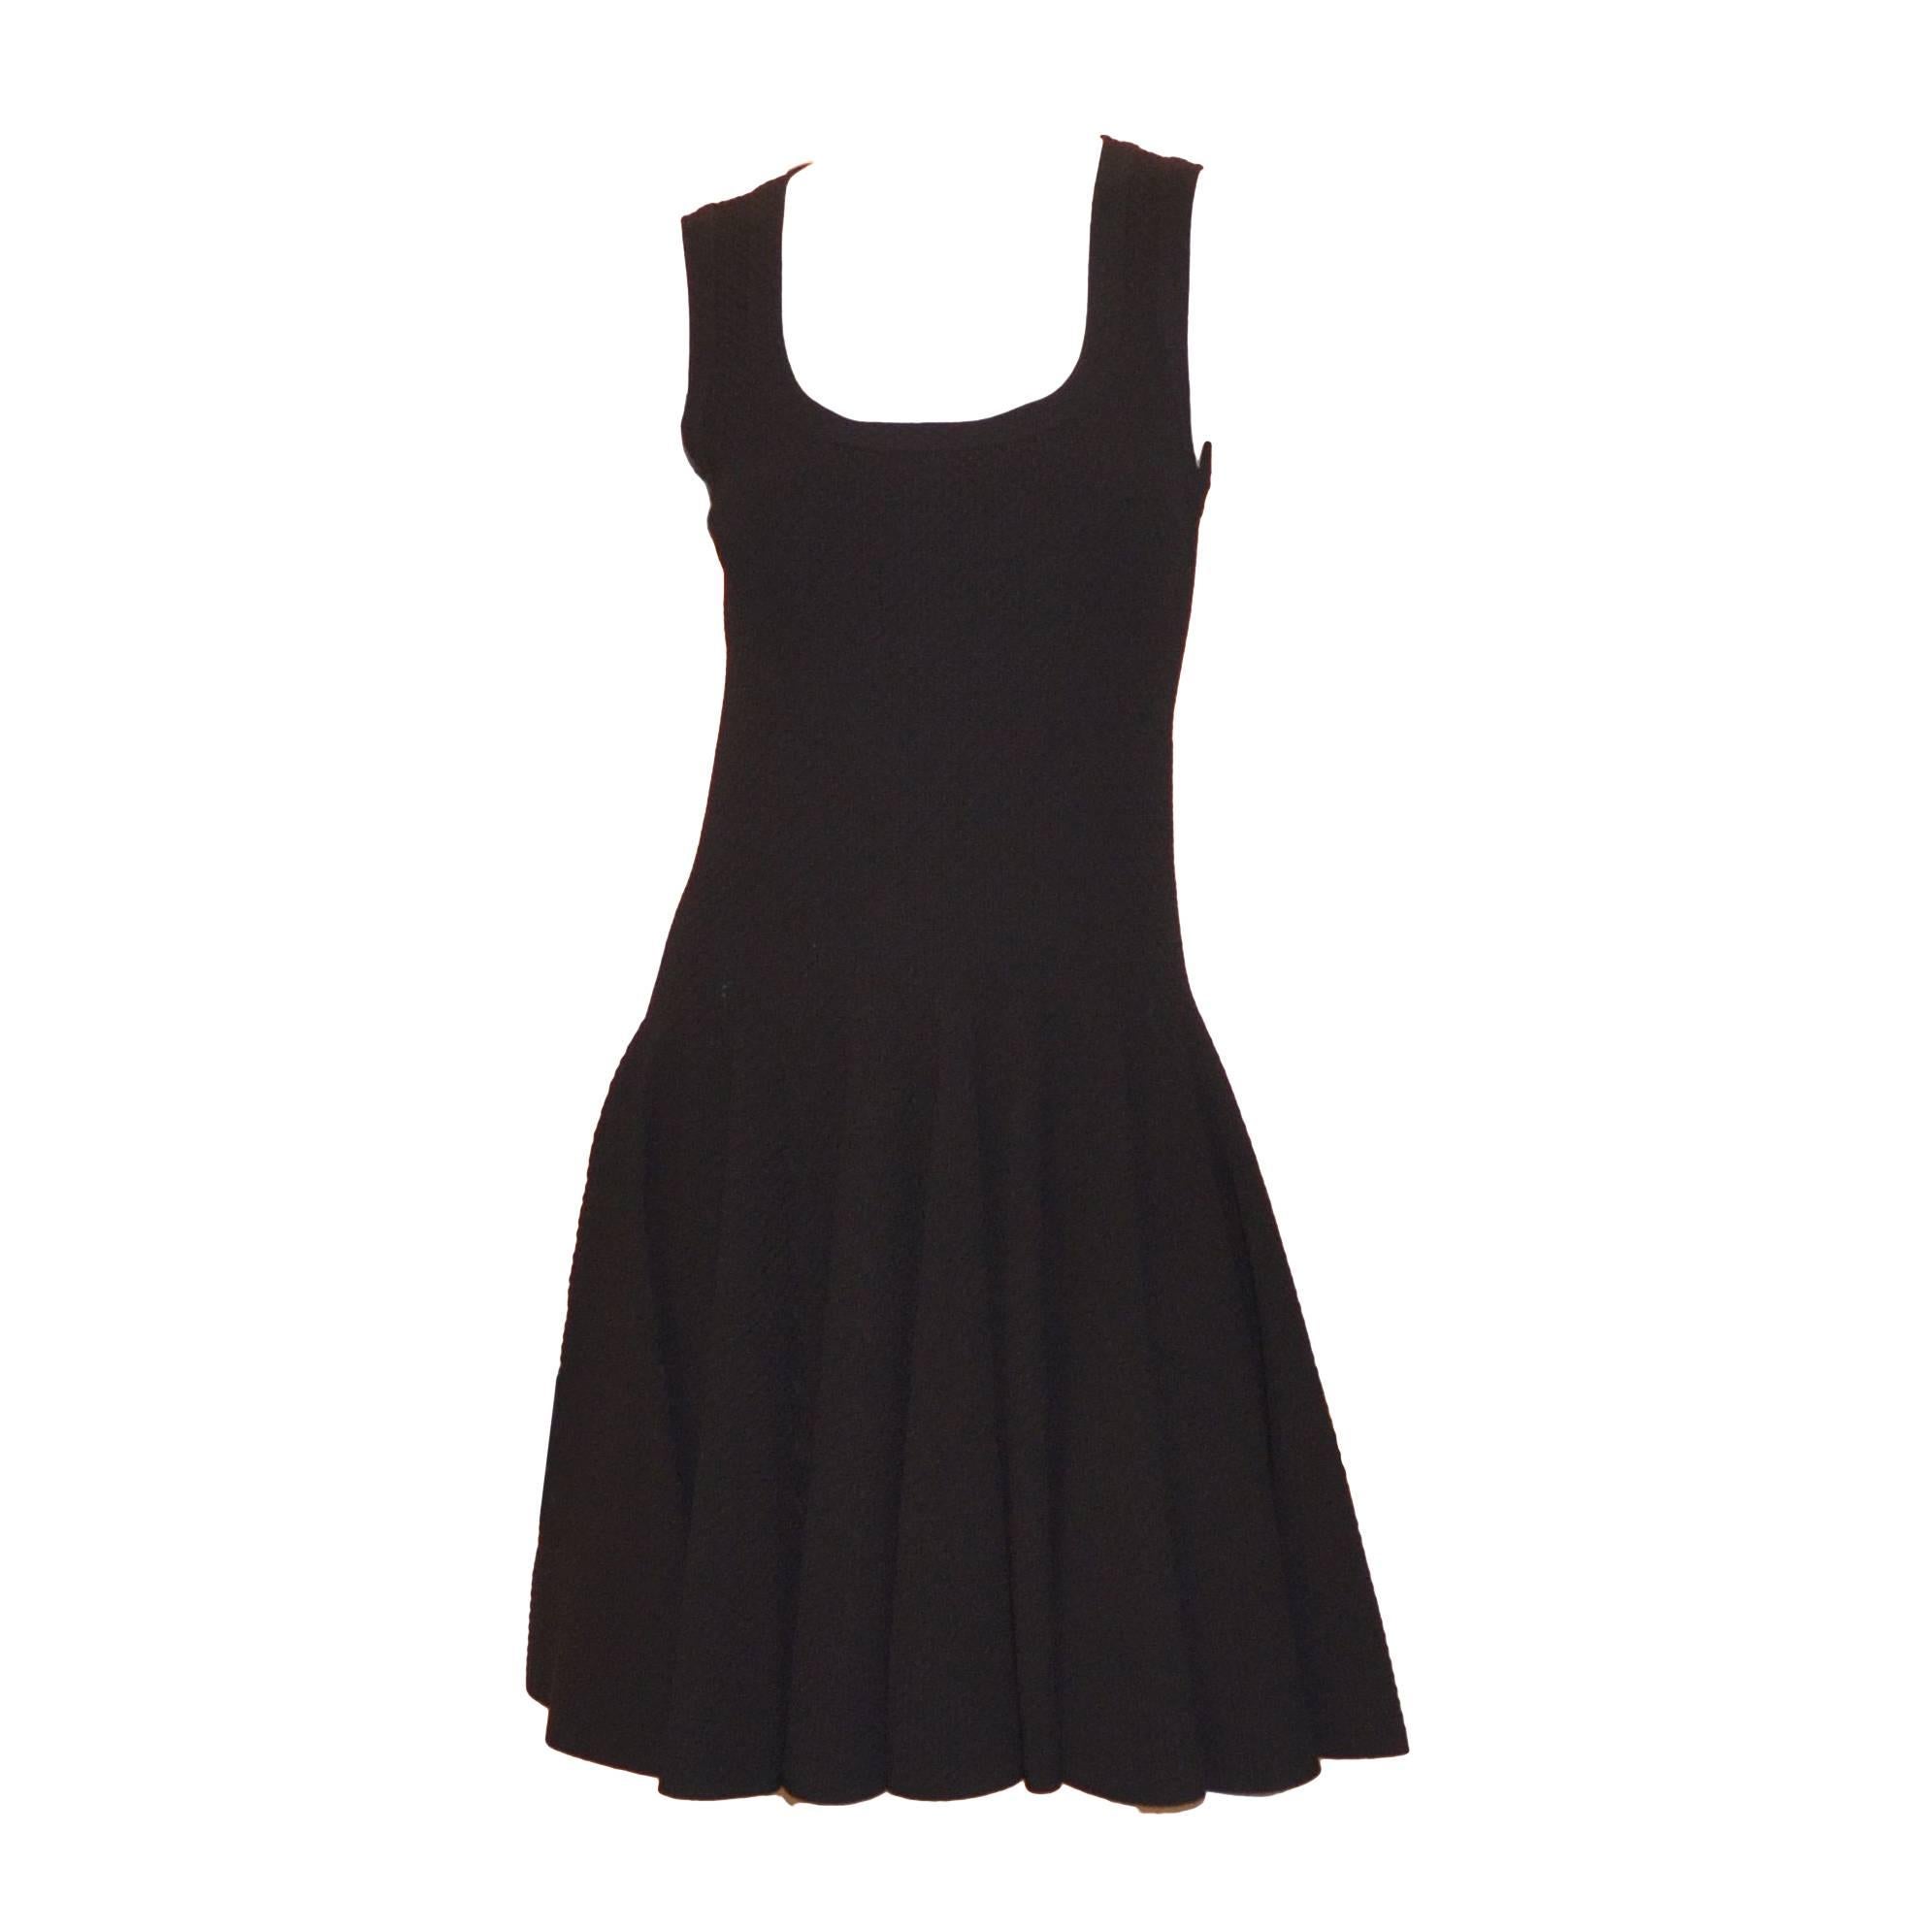 Alaia Black Fit and Flare Stretchy LBD Dress NWT